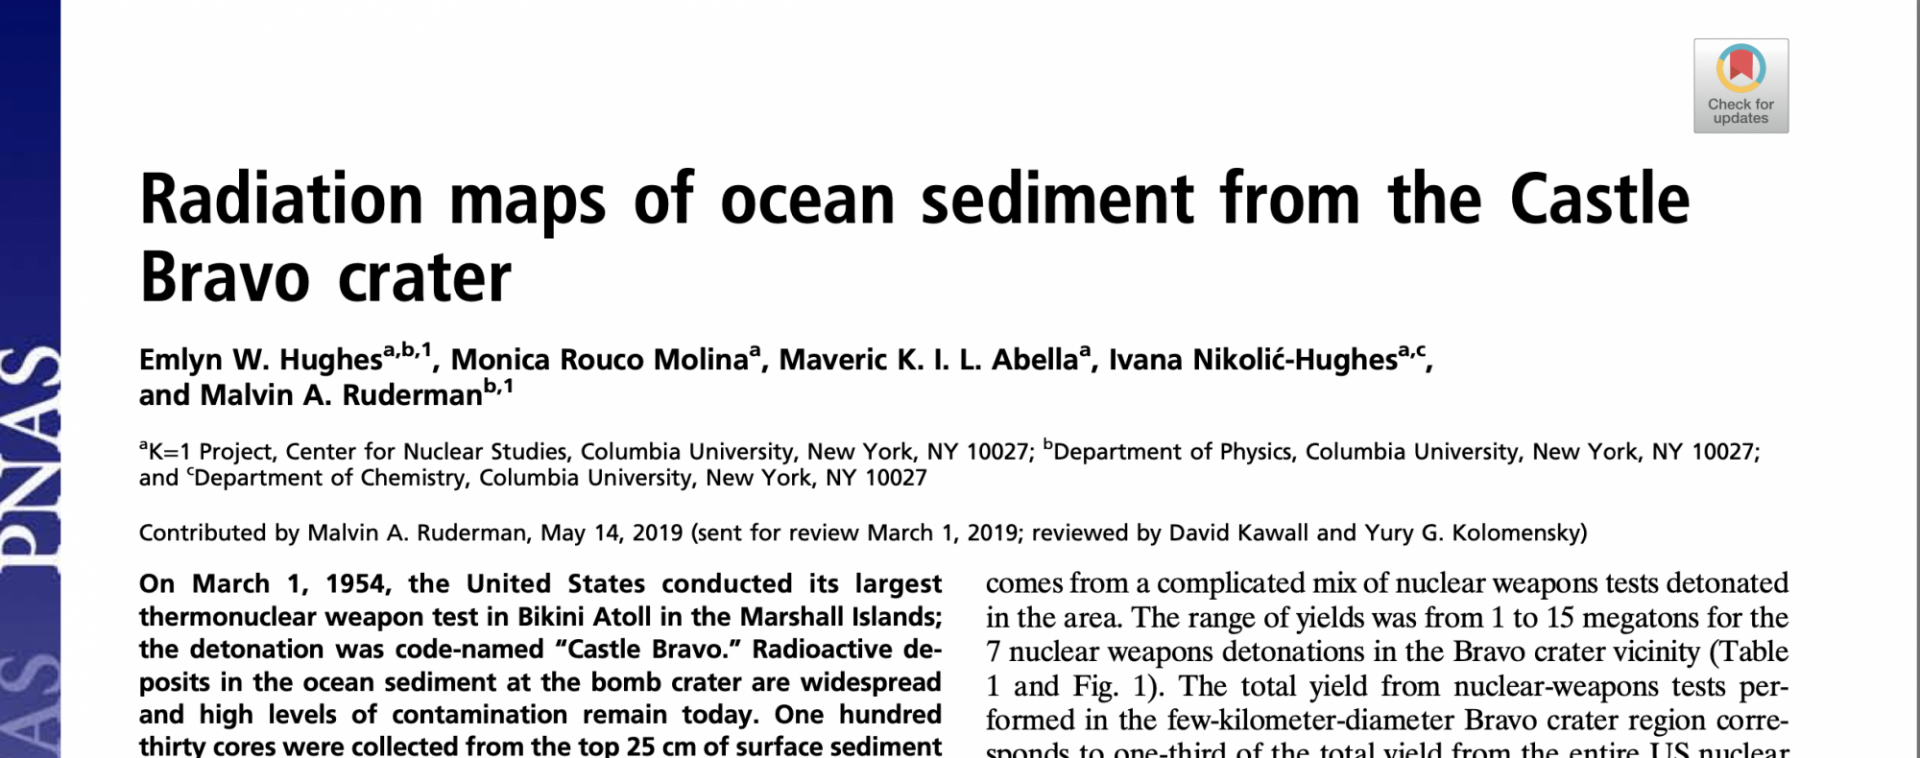 2019 publication in PNAS with measurements of ocean sediment from the Castle Bravo crater on the K=1 Project's 2018 trip